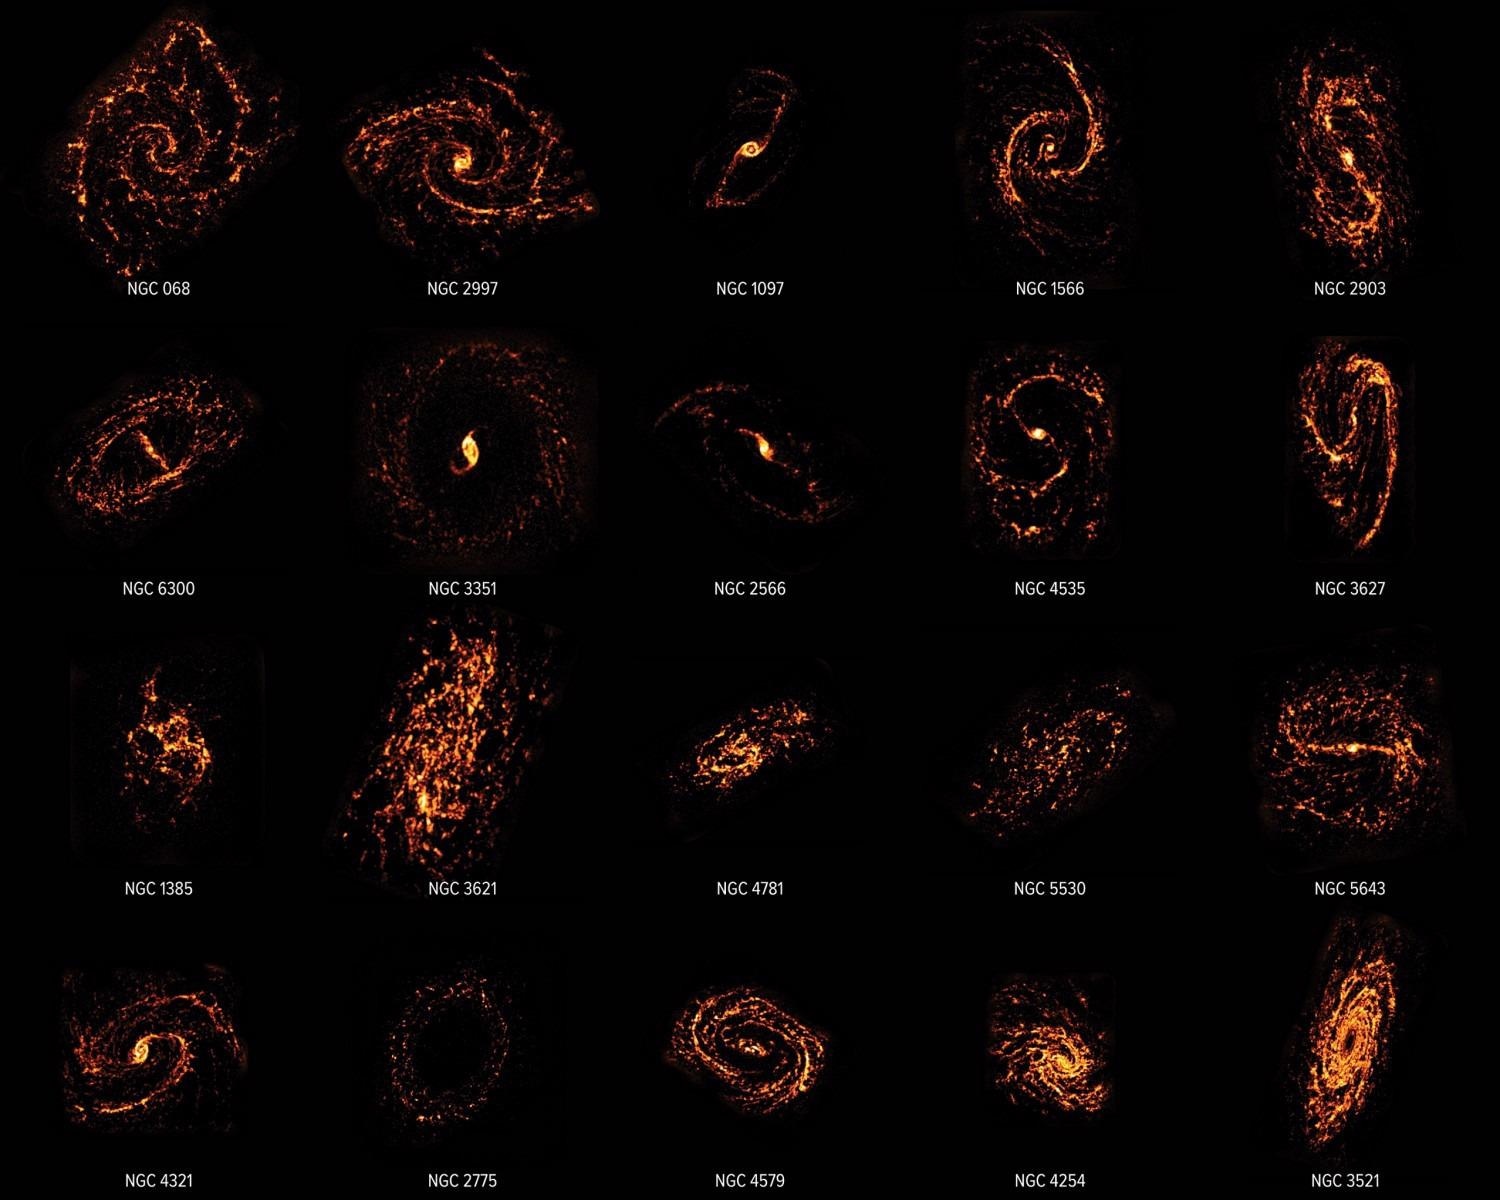 Researchers Perform First Systematic Survey of "Stellar Nurseries" Across the Universe.